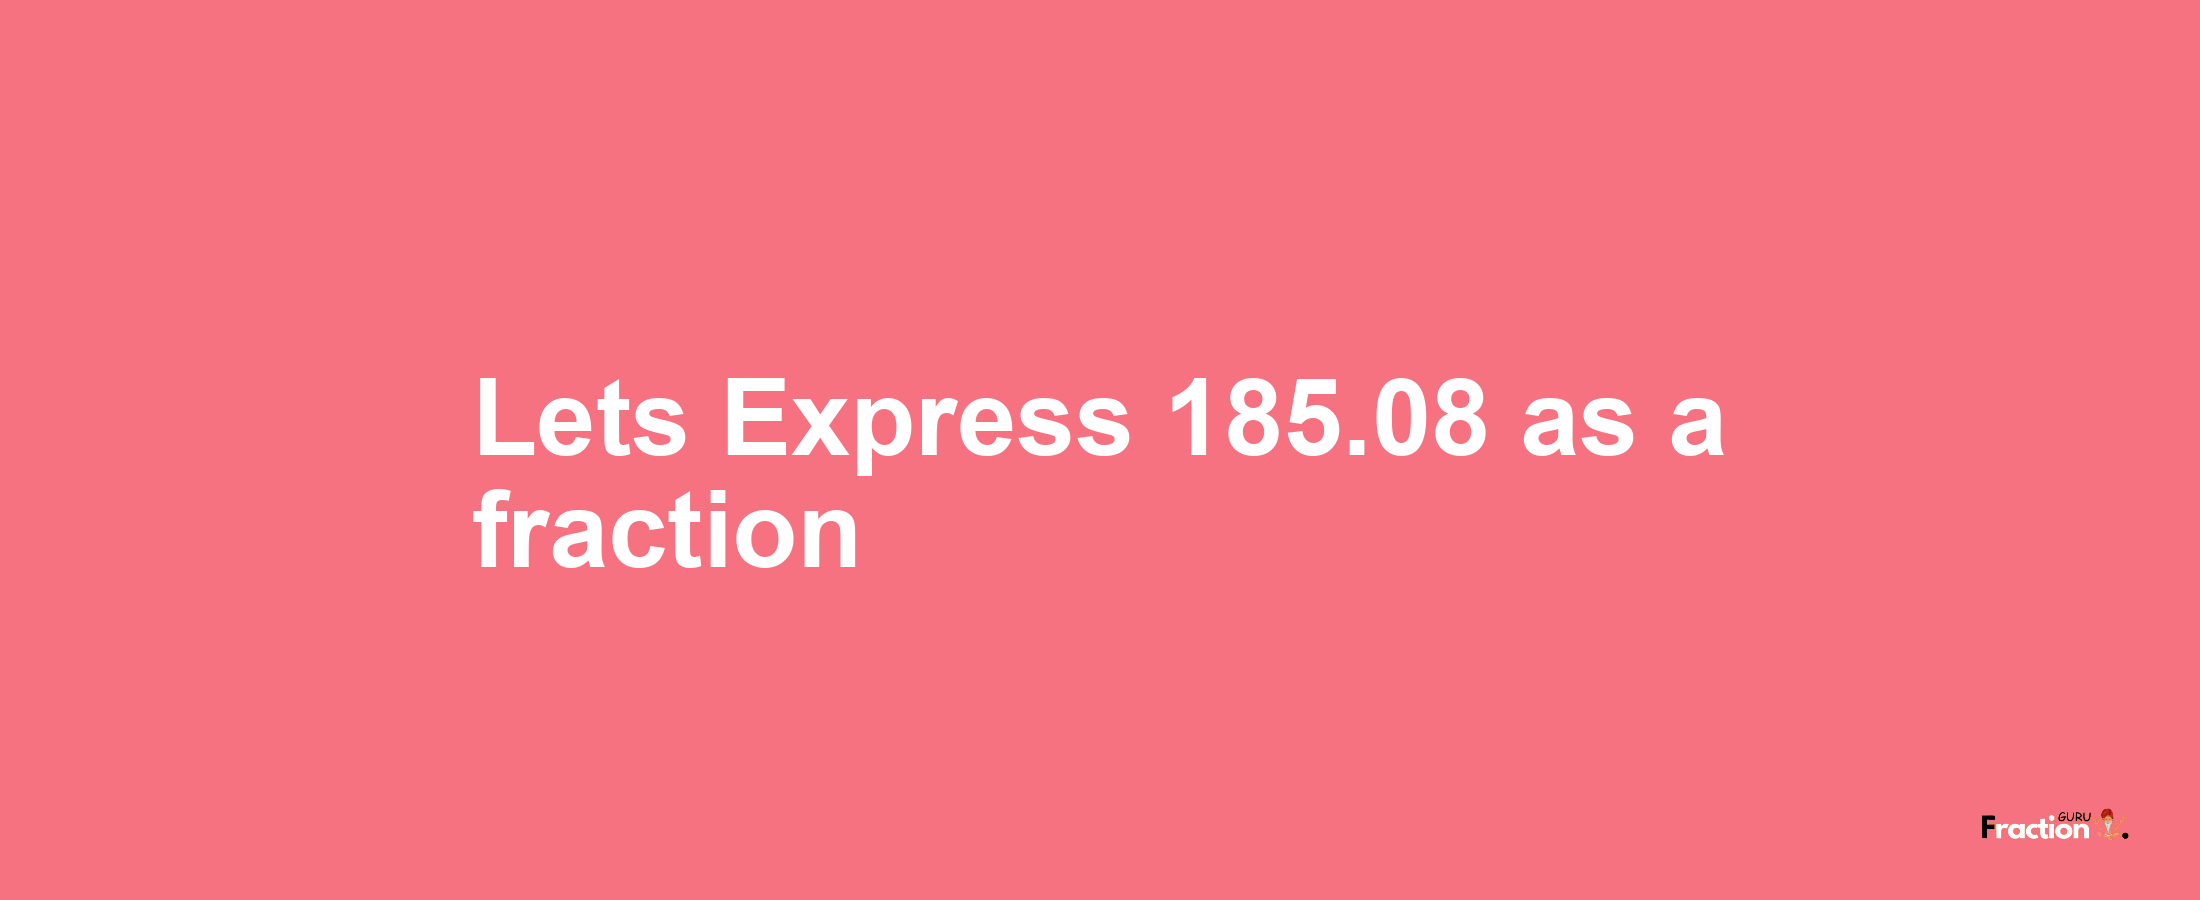 Lets Express 185.08 as afraction